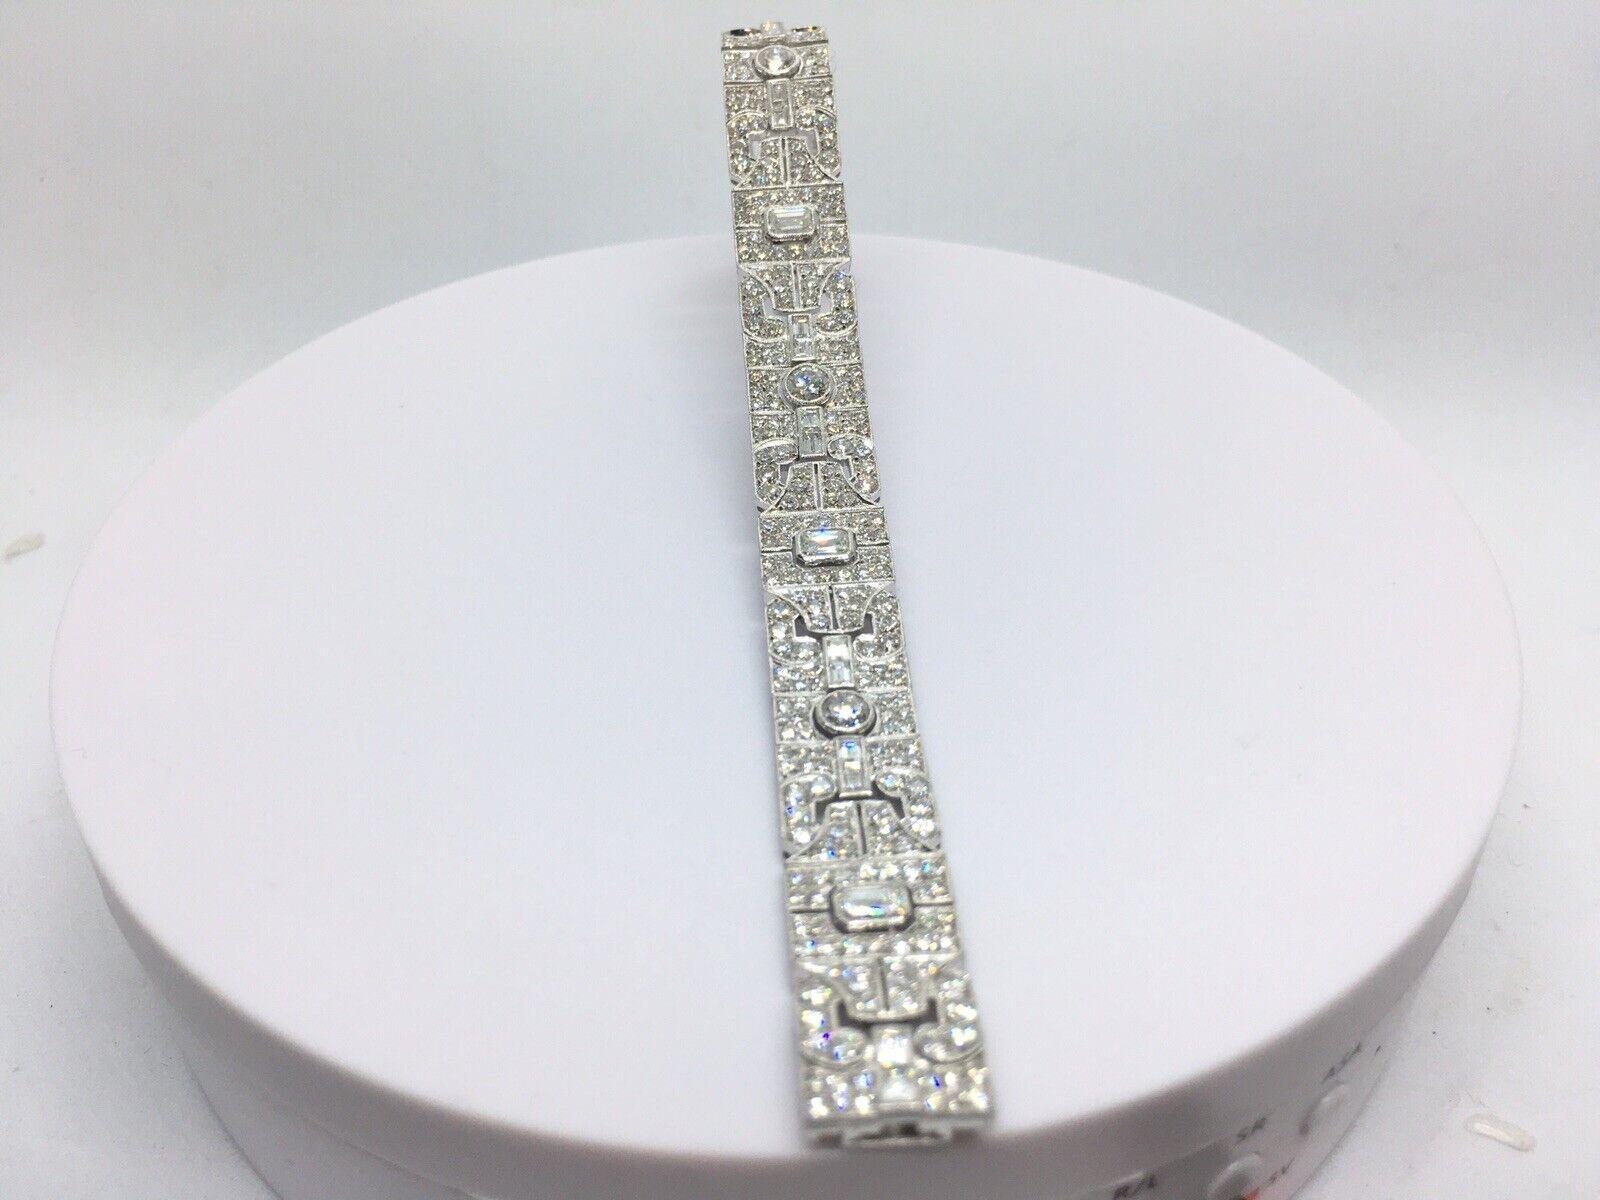 14K white gold 12.5 Carat Diamond Bracelet 6.25 inch New Art Deco Style 


6.25 inch long 14K White Gold
Weighting 26.3 gram, safety 
4 larger Round, 4 Emerald cut,  16 Baguette cut, 360 pcs of  smaller round, 
4 Round Cut @ 0.20 Carat each total of